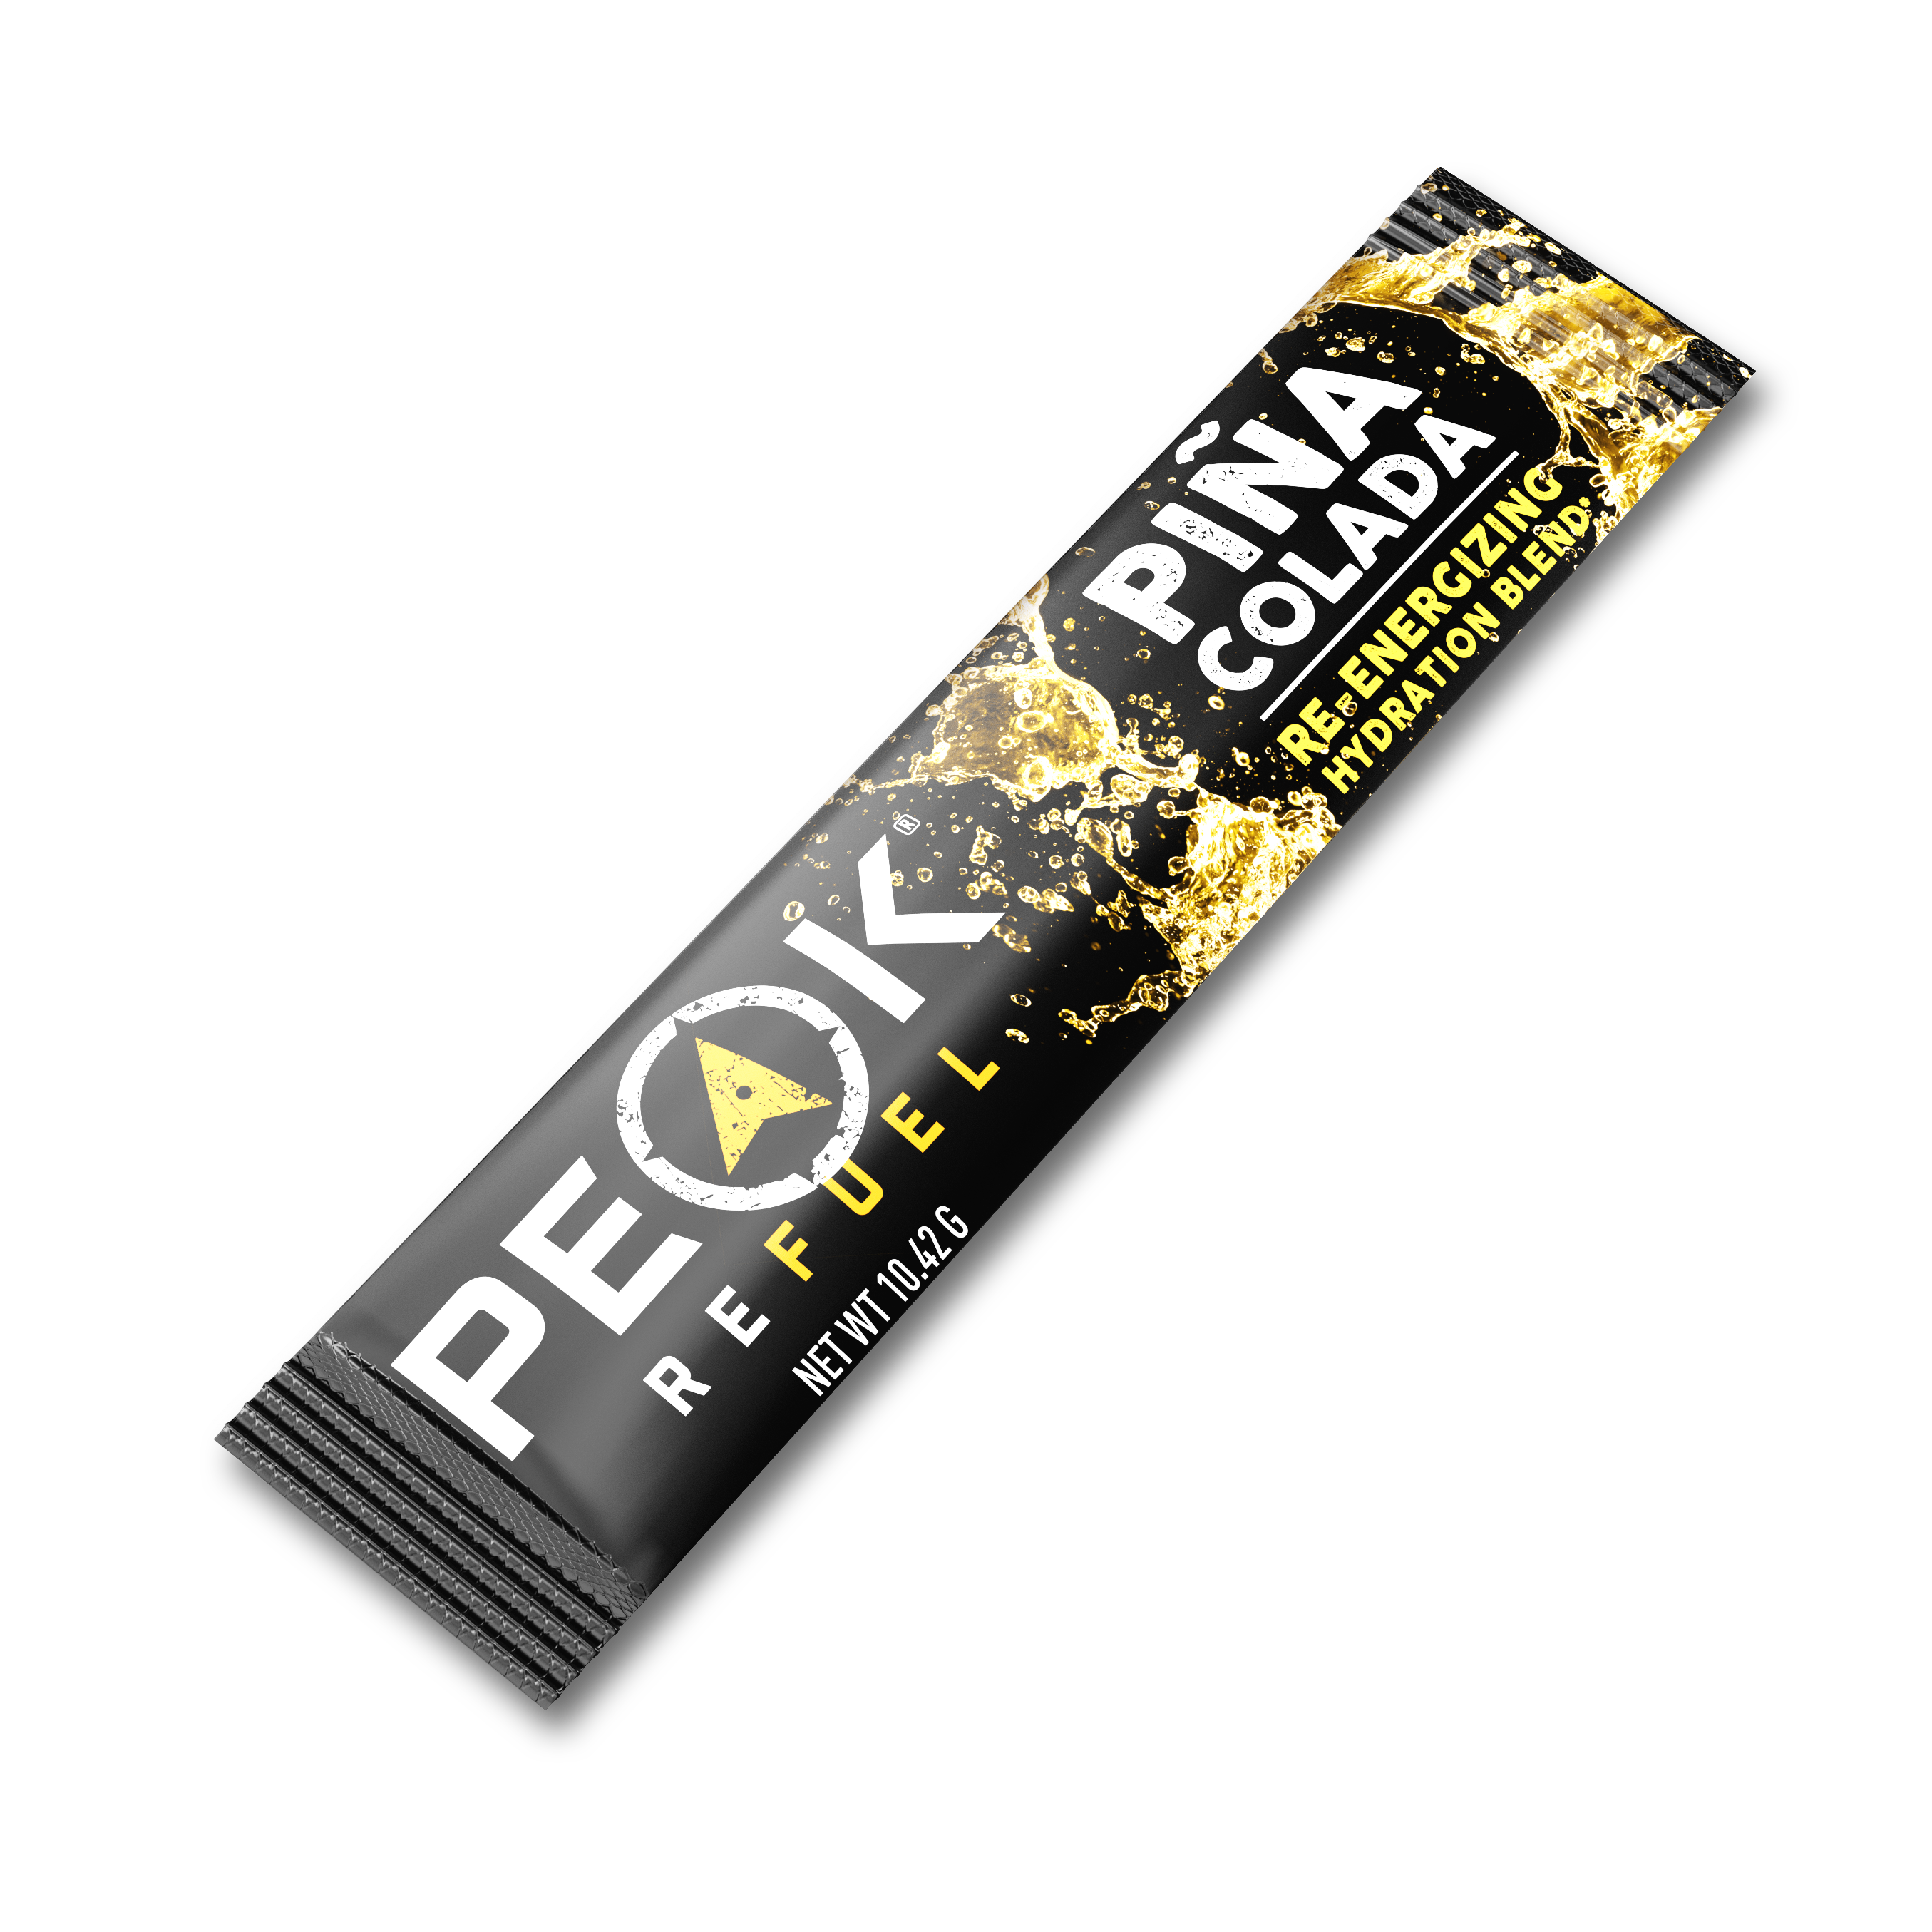 A black and yellow packet with white text, ideal for food labeling.